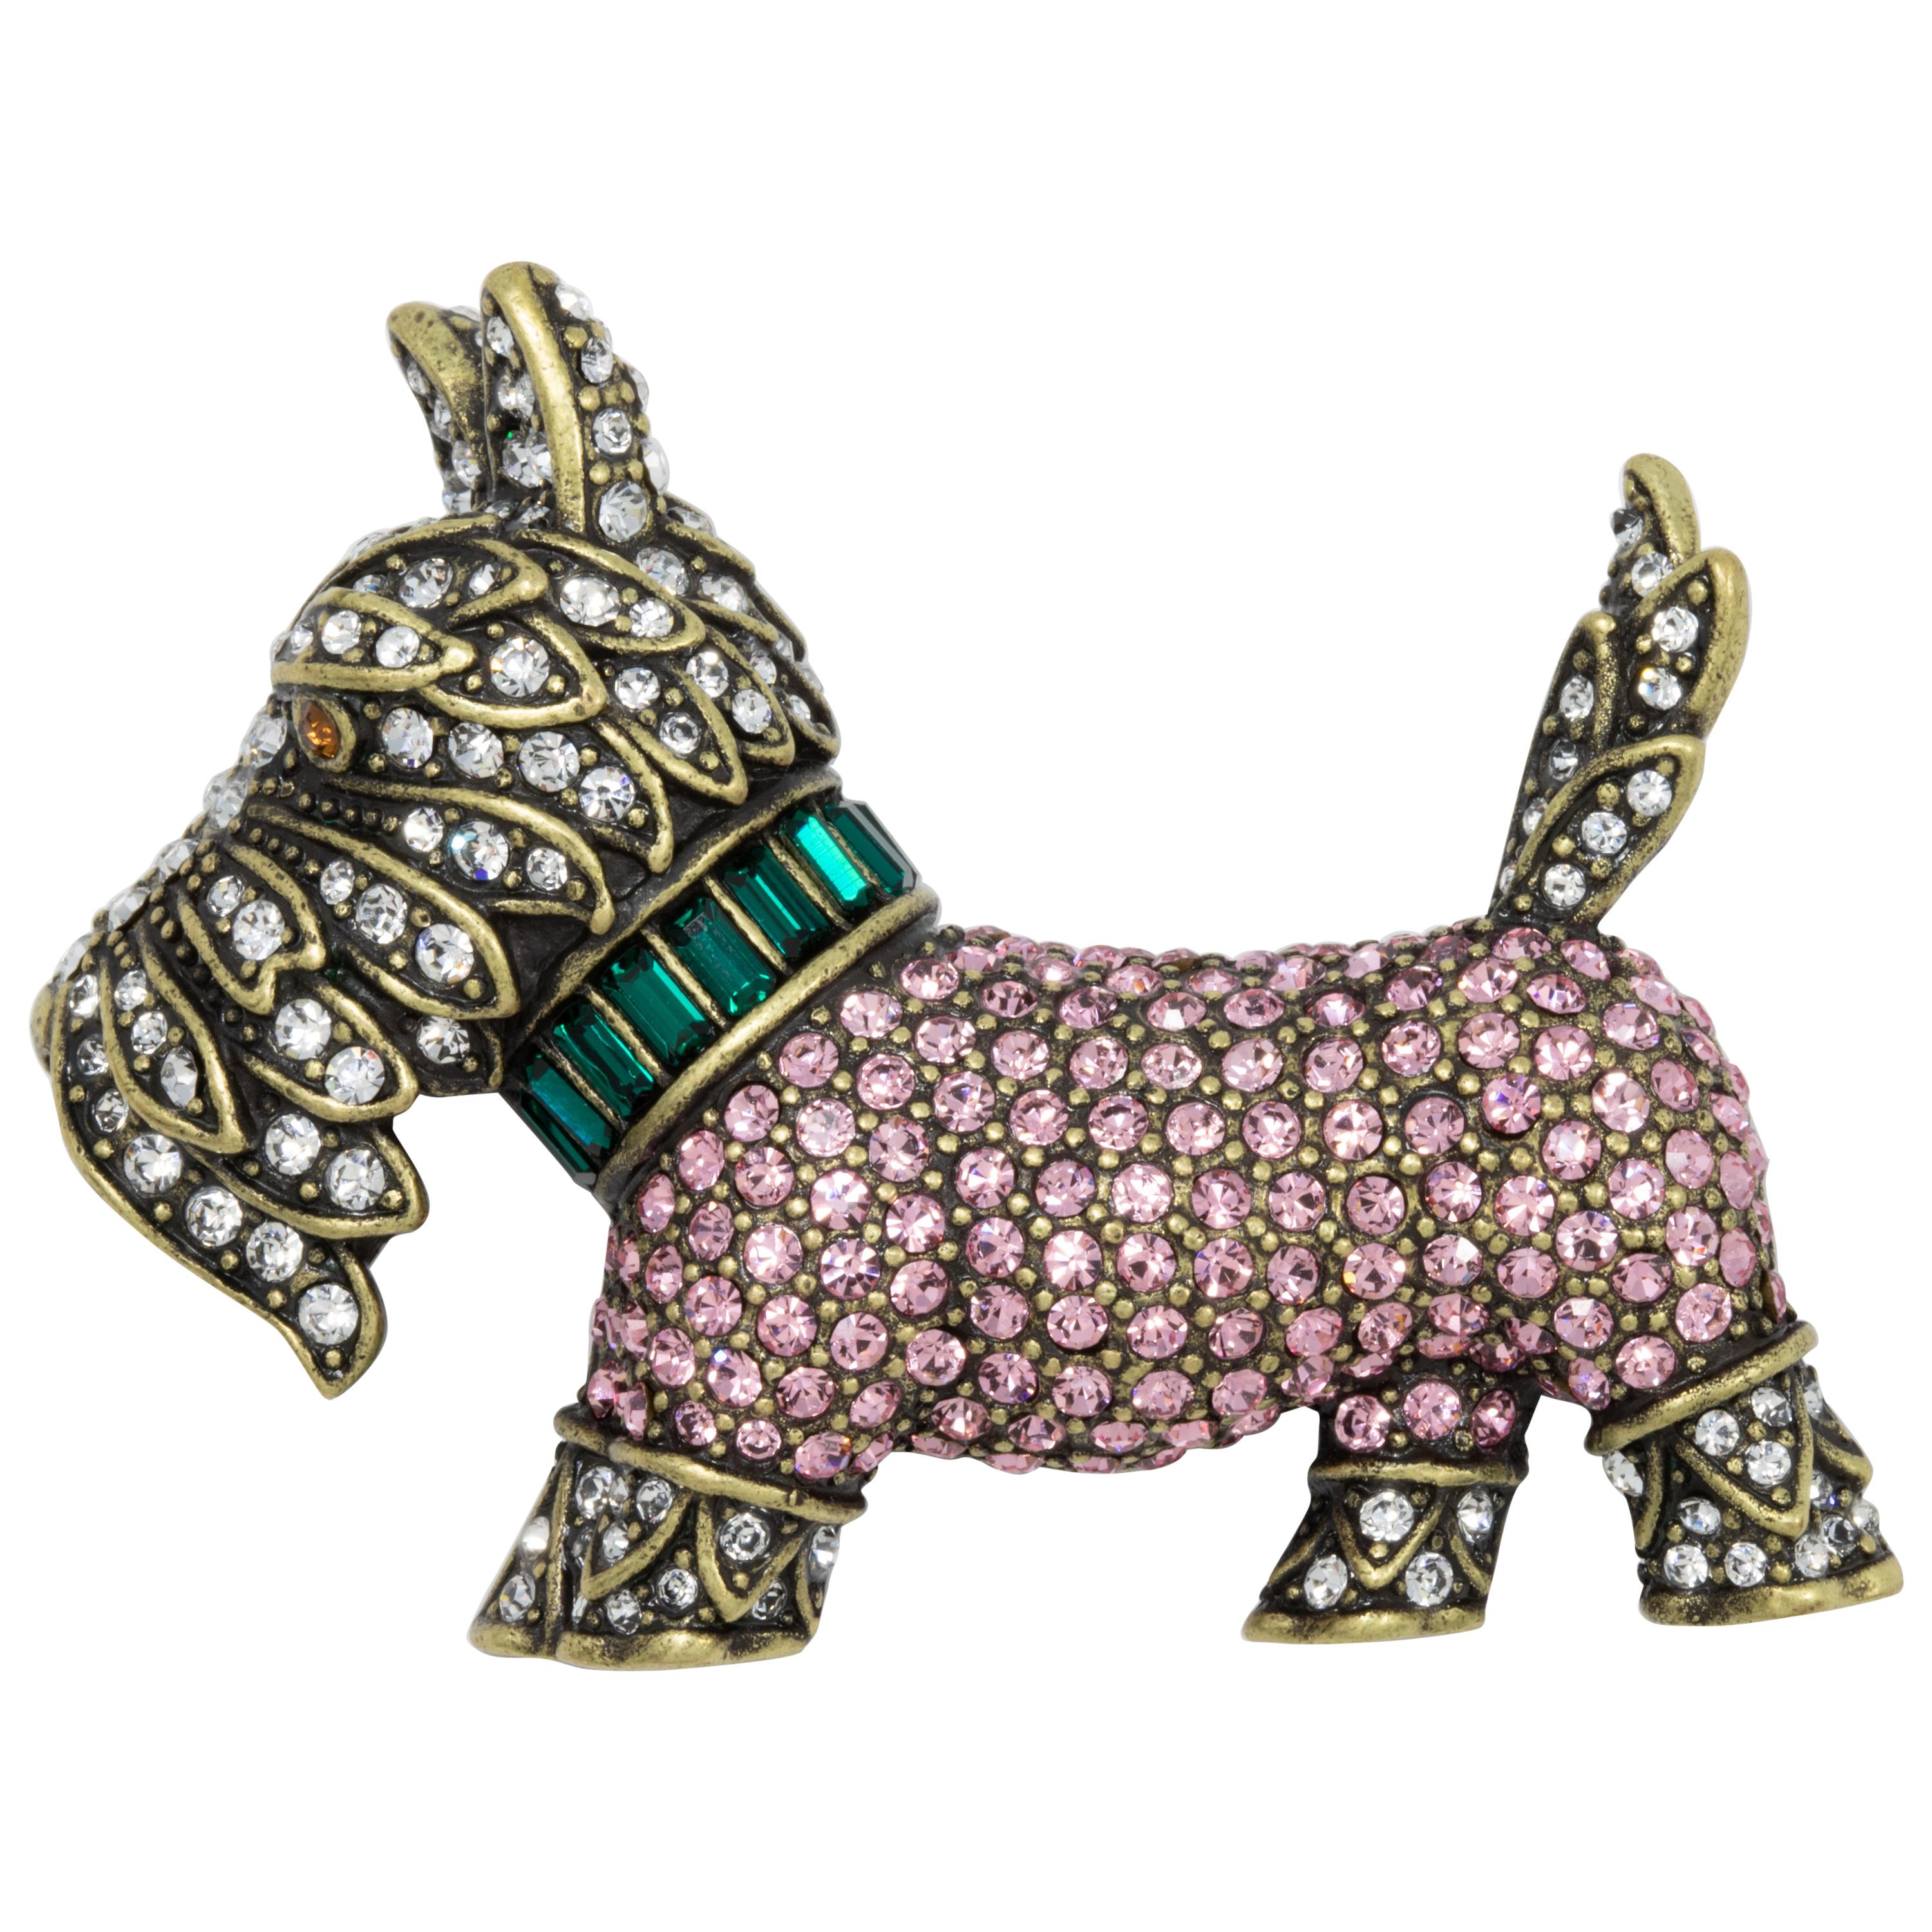 Heidi Daus Diamond in the Woof Scottie Dog Brooch Pin, Pink Green Clear Crystals